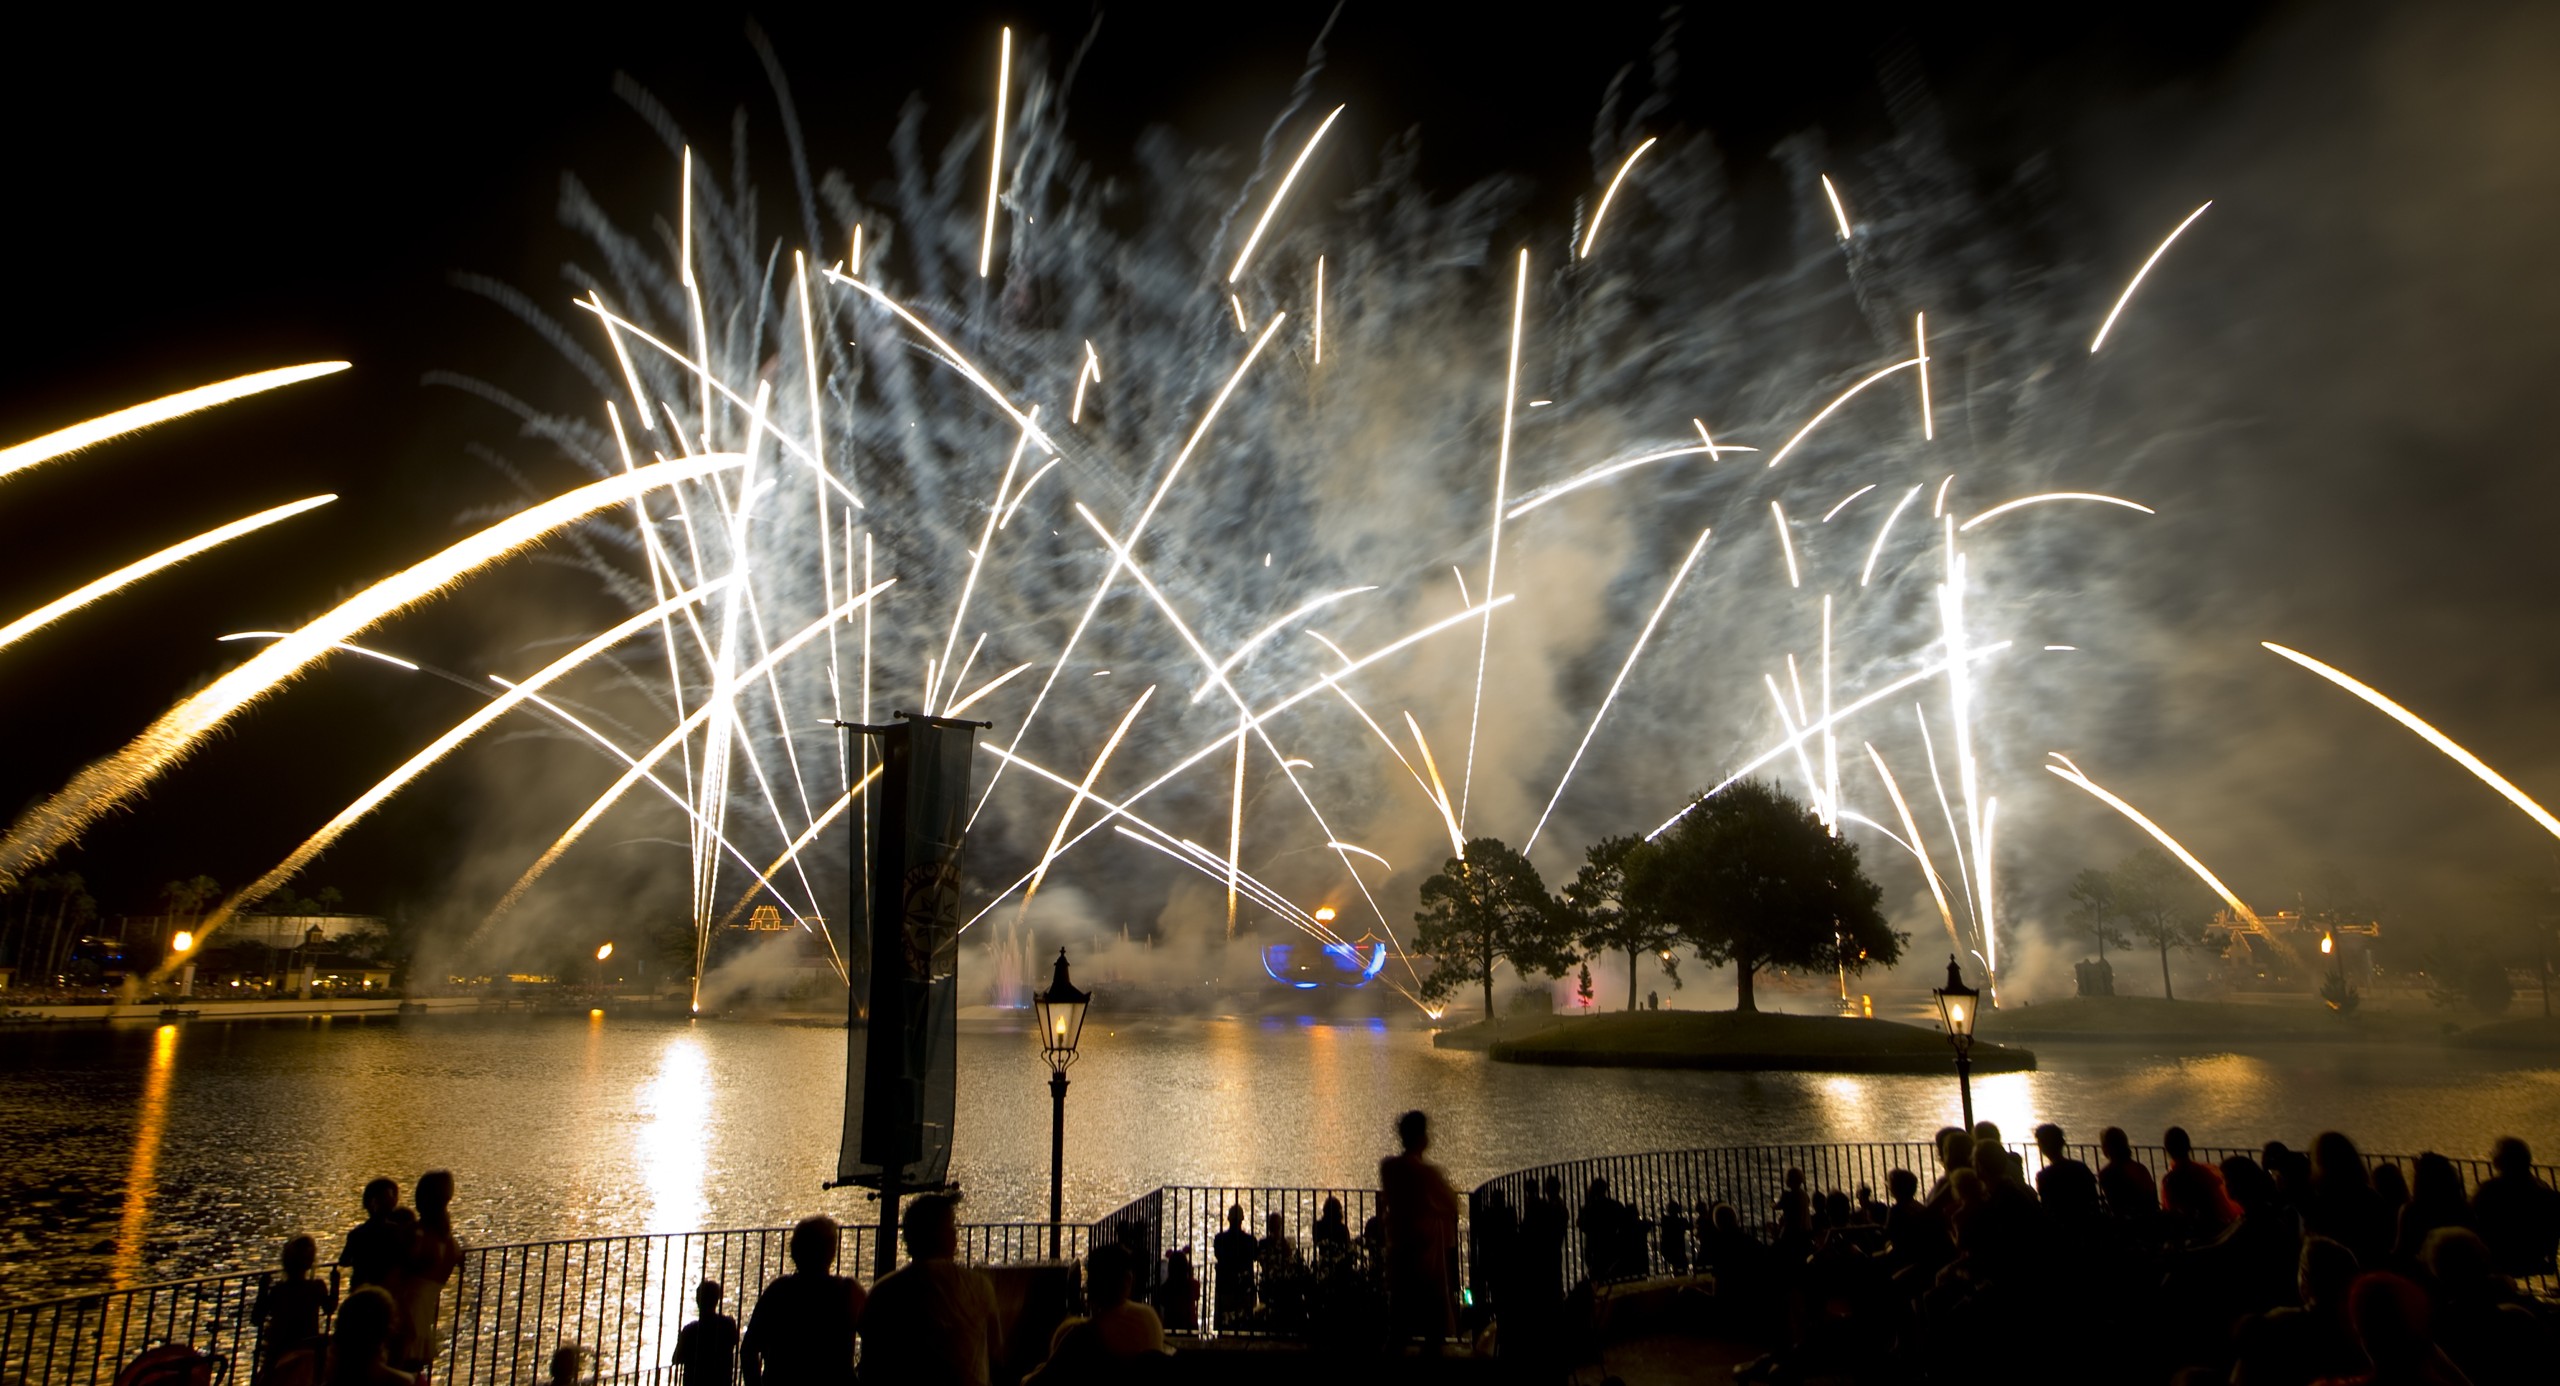 Guests can end their day with IllumiNations Sparkling Dessert Party